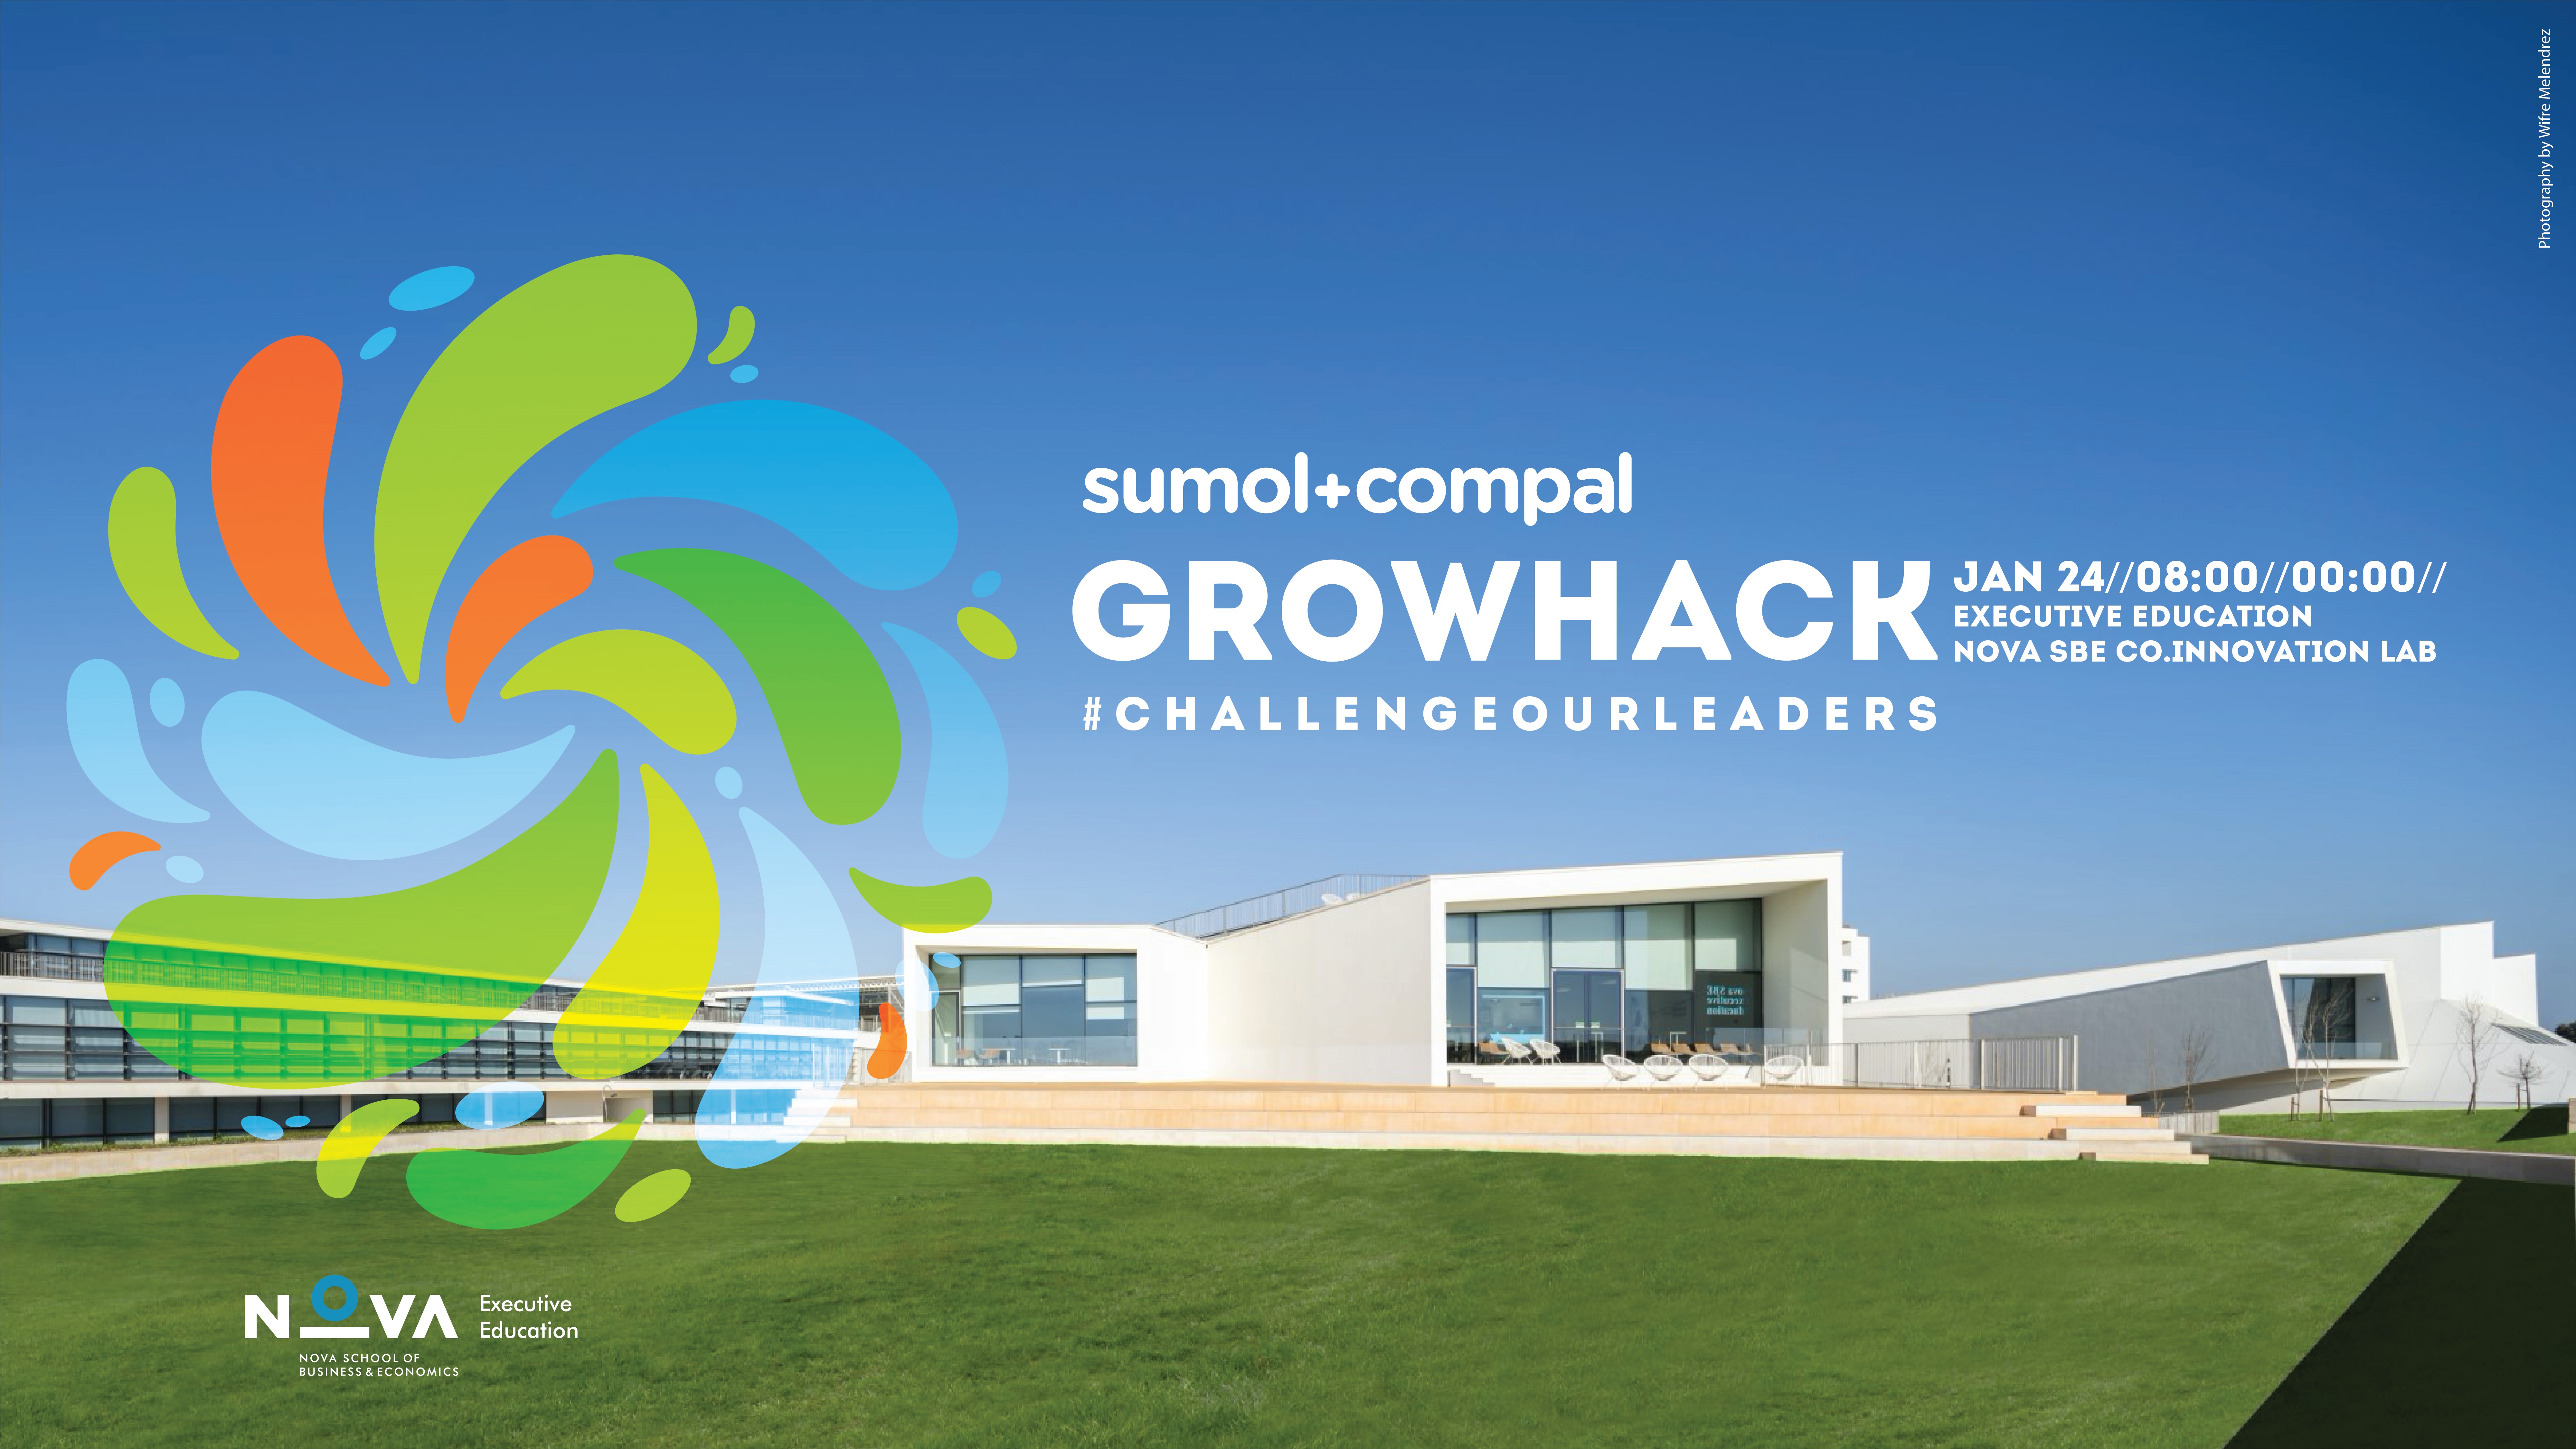 Sumol Compal Growhack Challenge Our Leaders